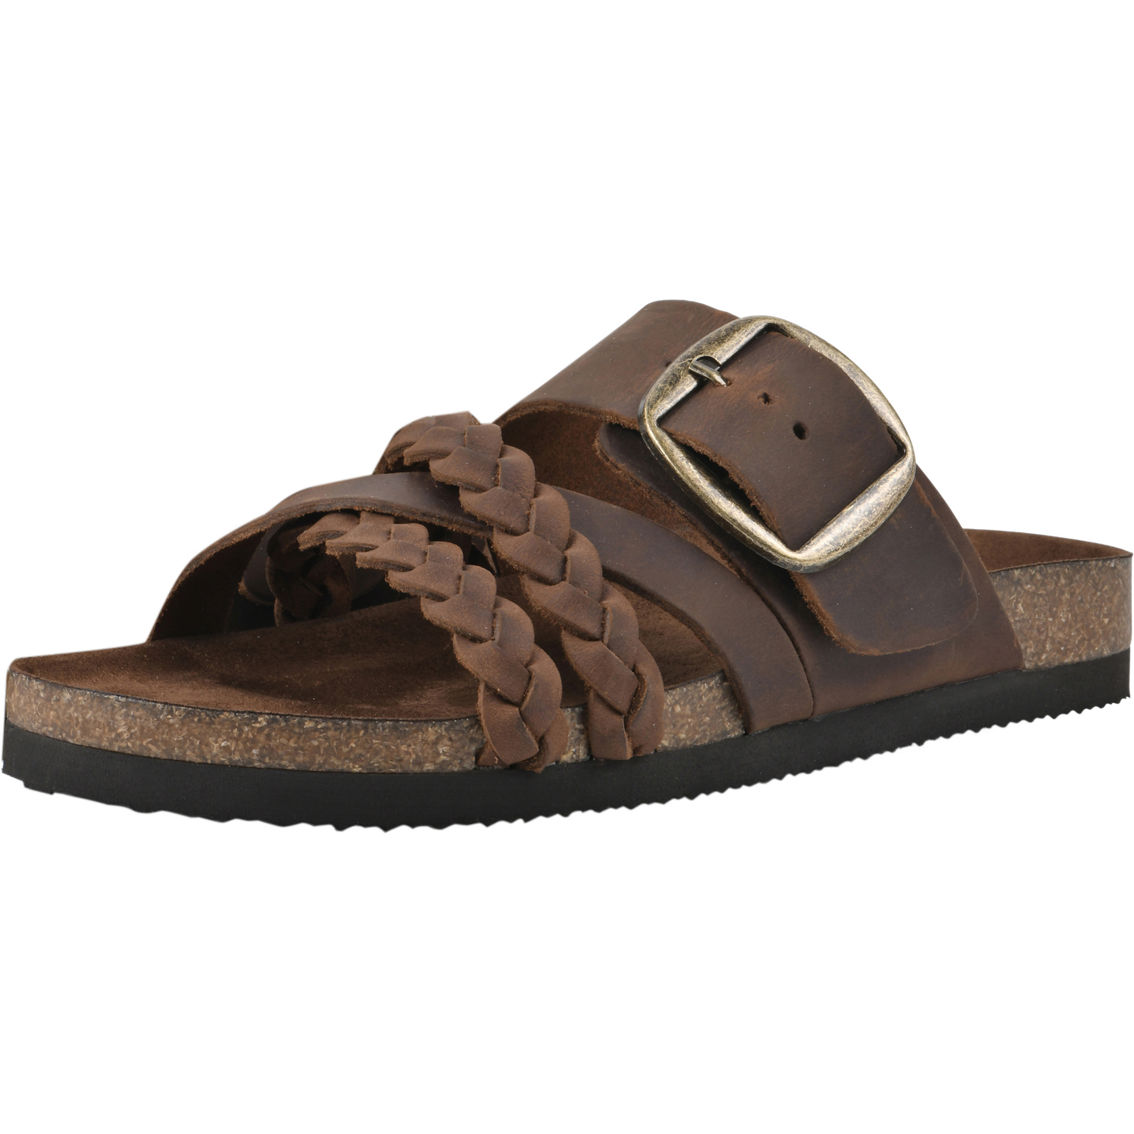 White Mountain Healing Leather Footbed Sandals - Image 2 of 2